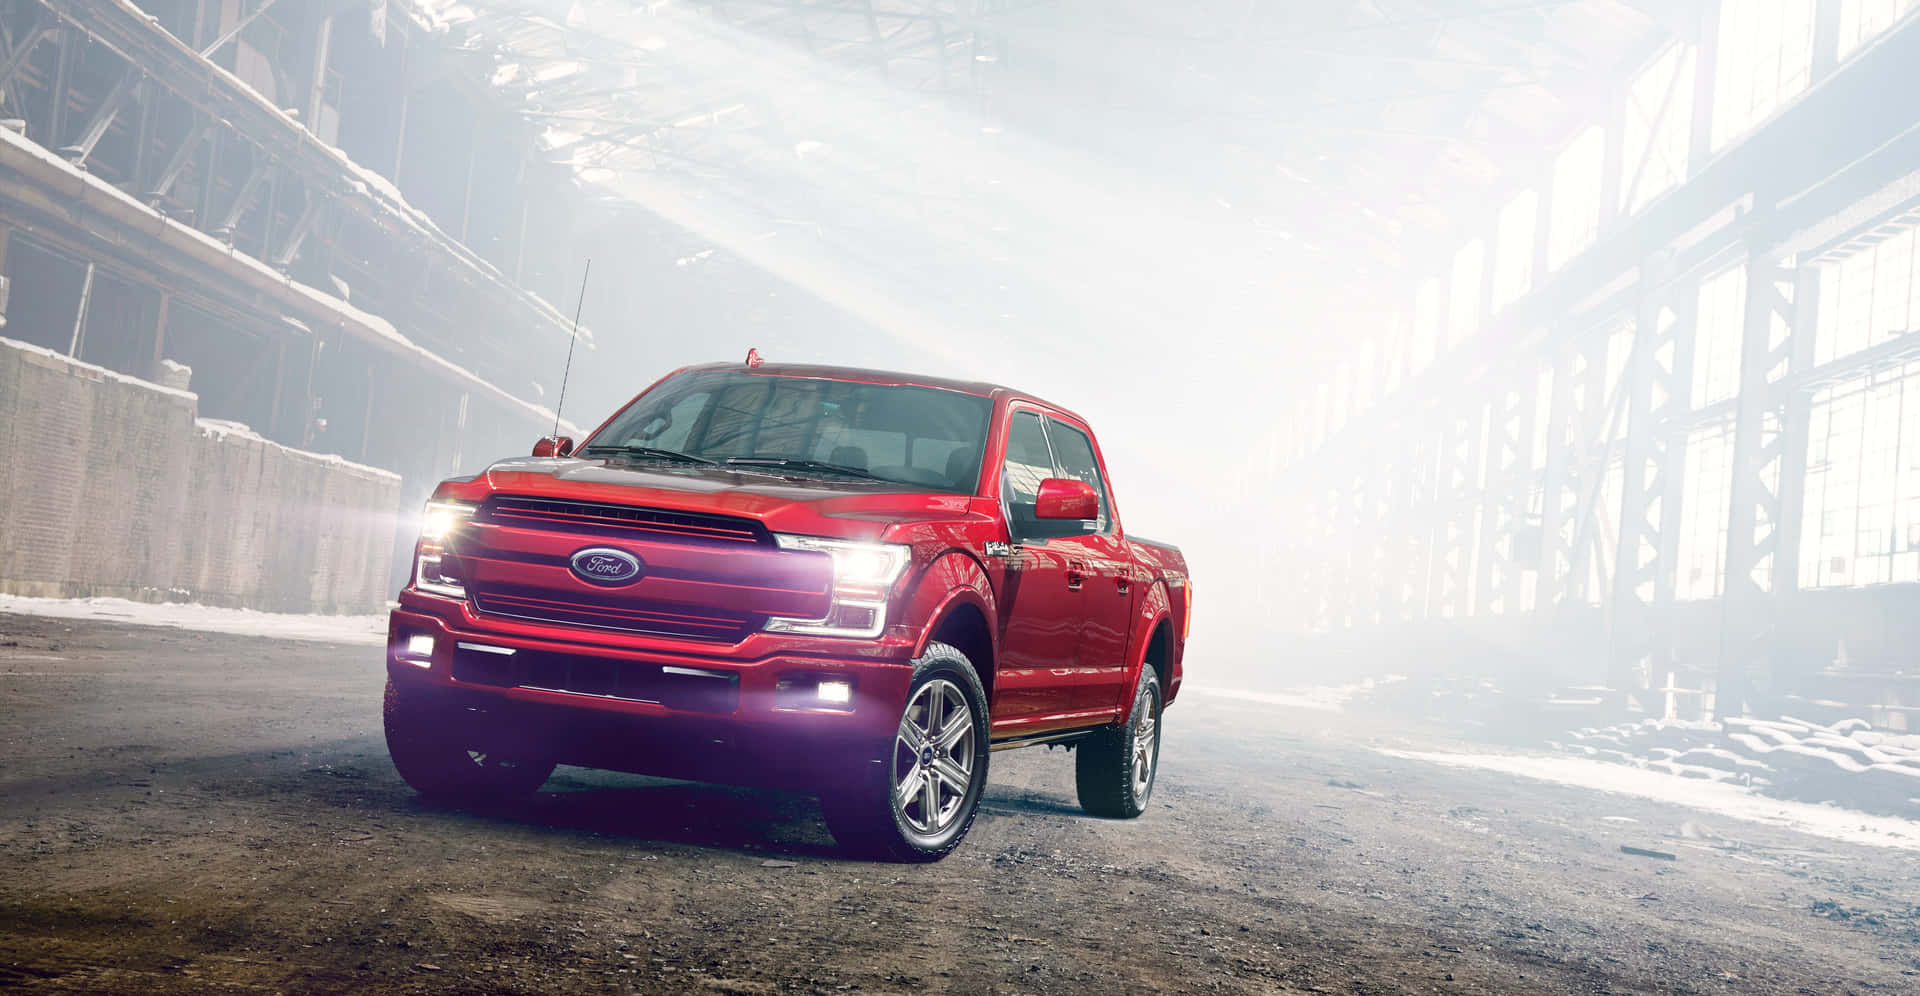 The Red Ford F-150 Is Driving Through An Industrial Building Wallpaper